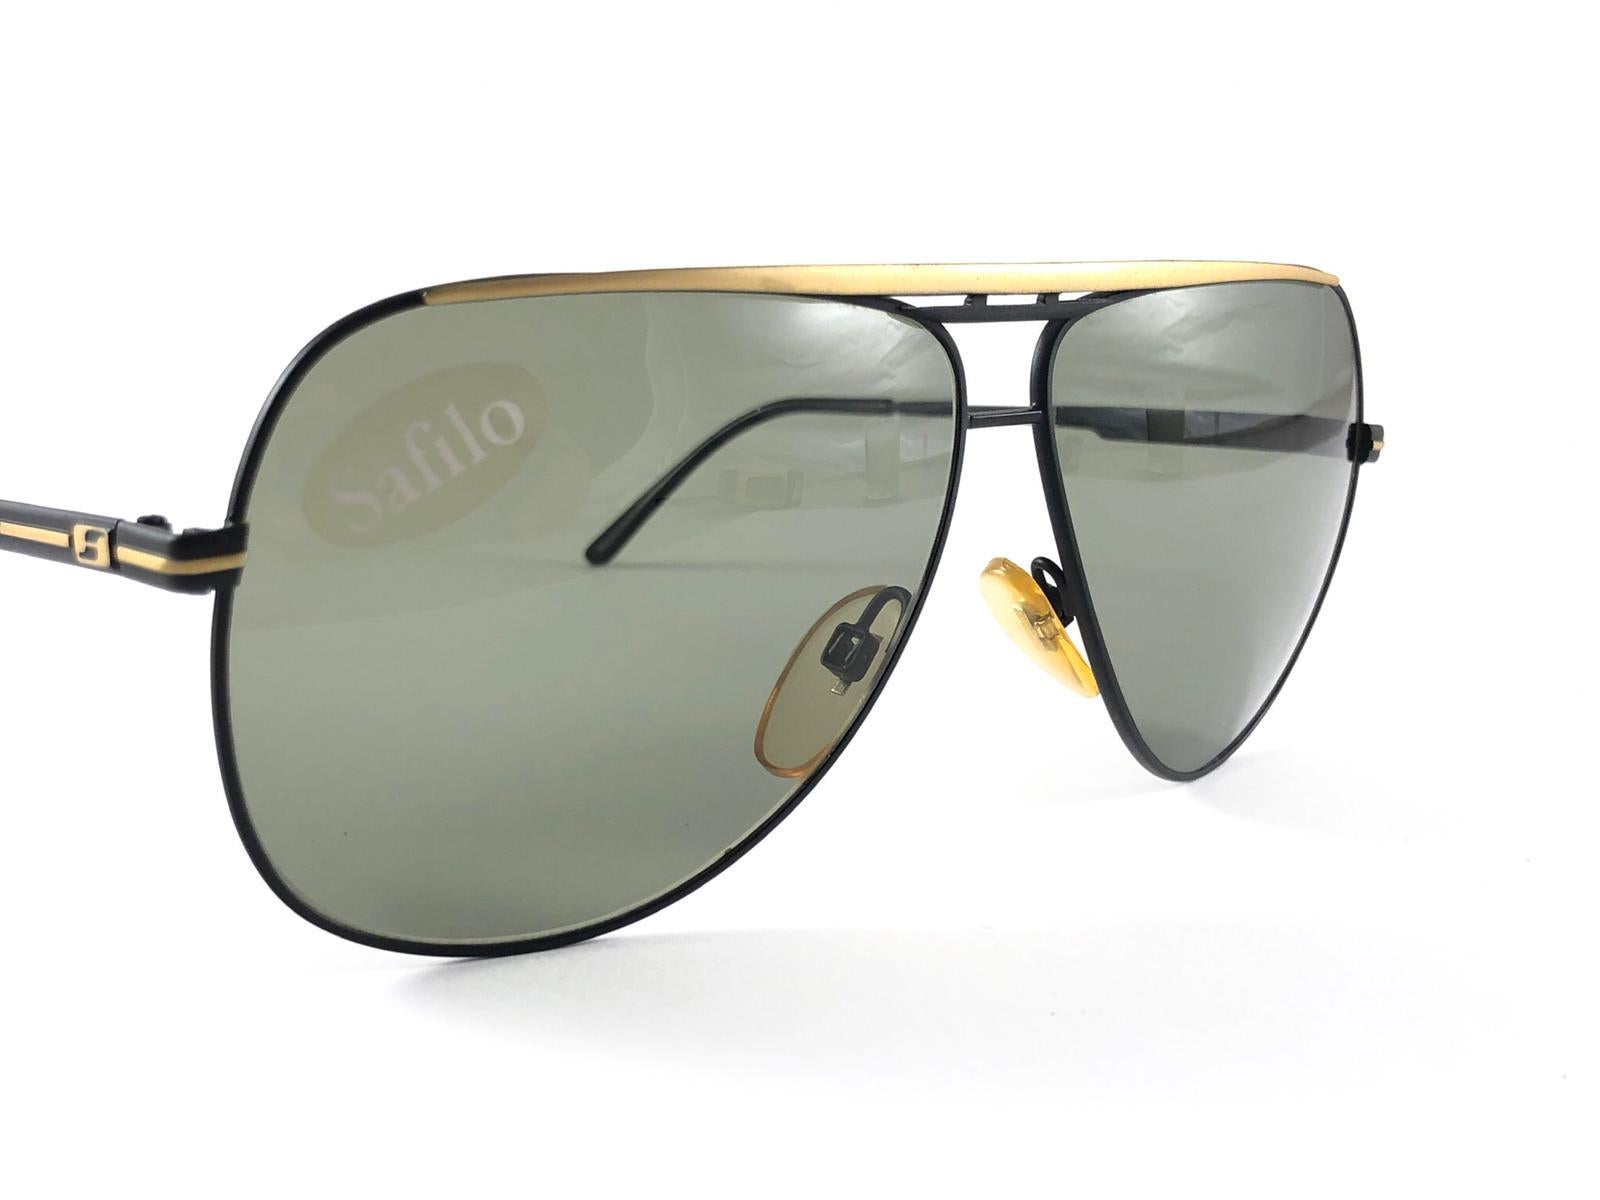 New Vintage Safilo, a balanced combination of Italian craftsmanship, design, functionality and striking aesthetics, this model showcases a Black and Gold mate Frame holding a spotless green lenses.

New, never worn or displayed.
Made in